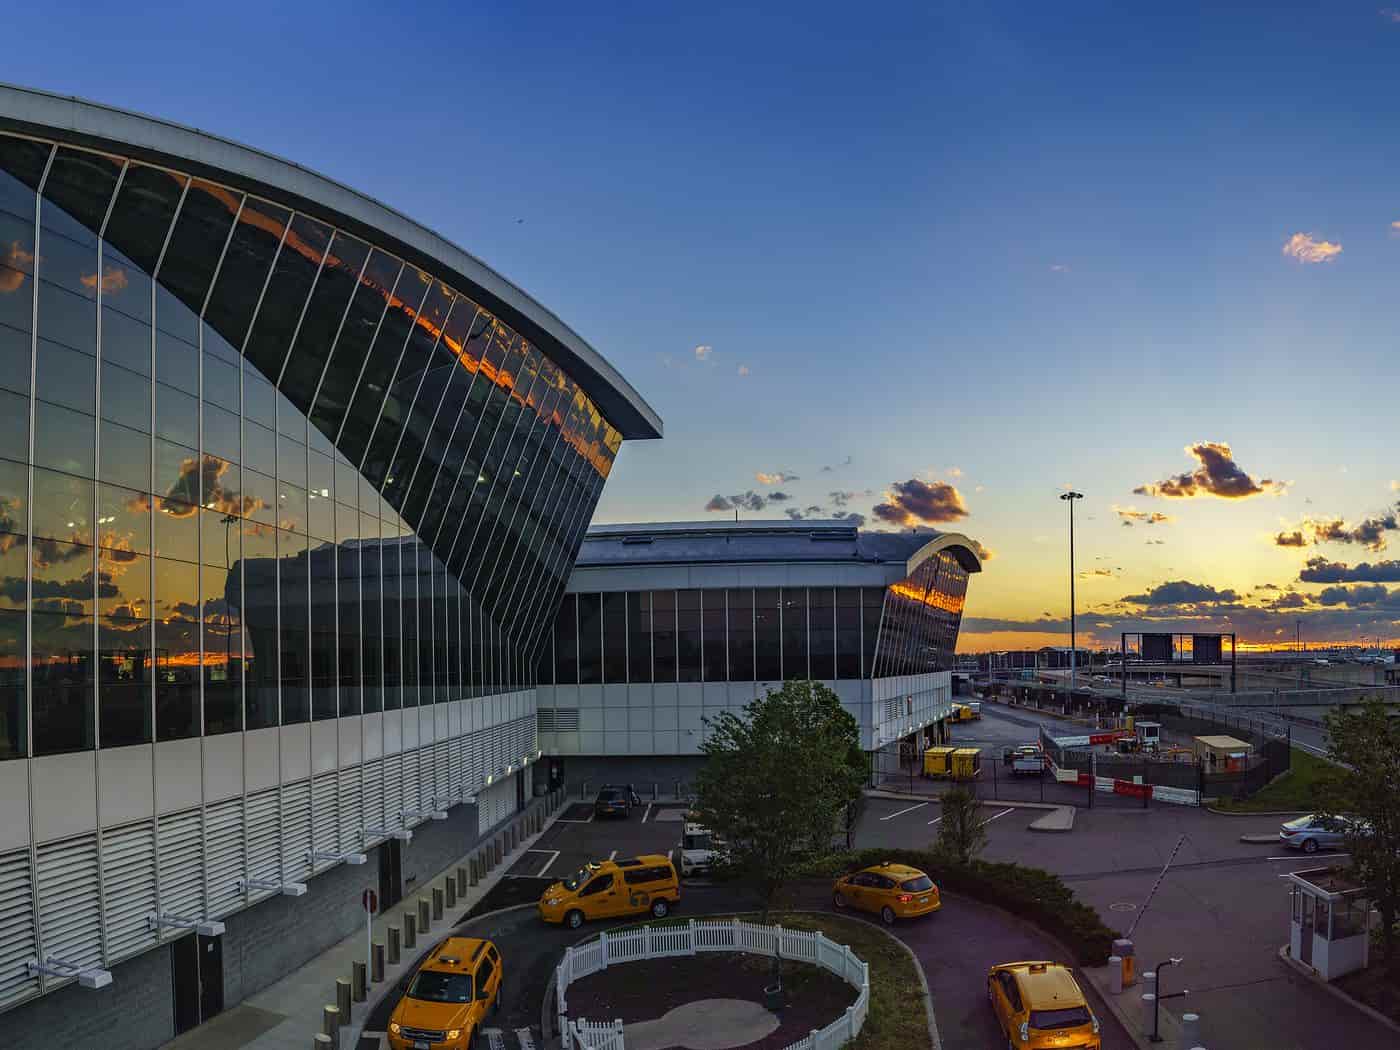 https://airportslounges.com/jfk-lounges/